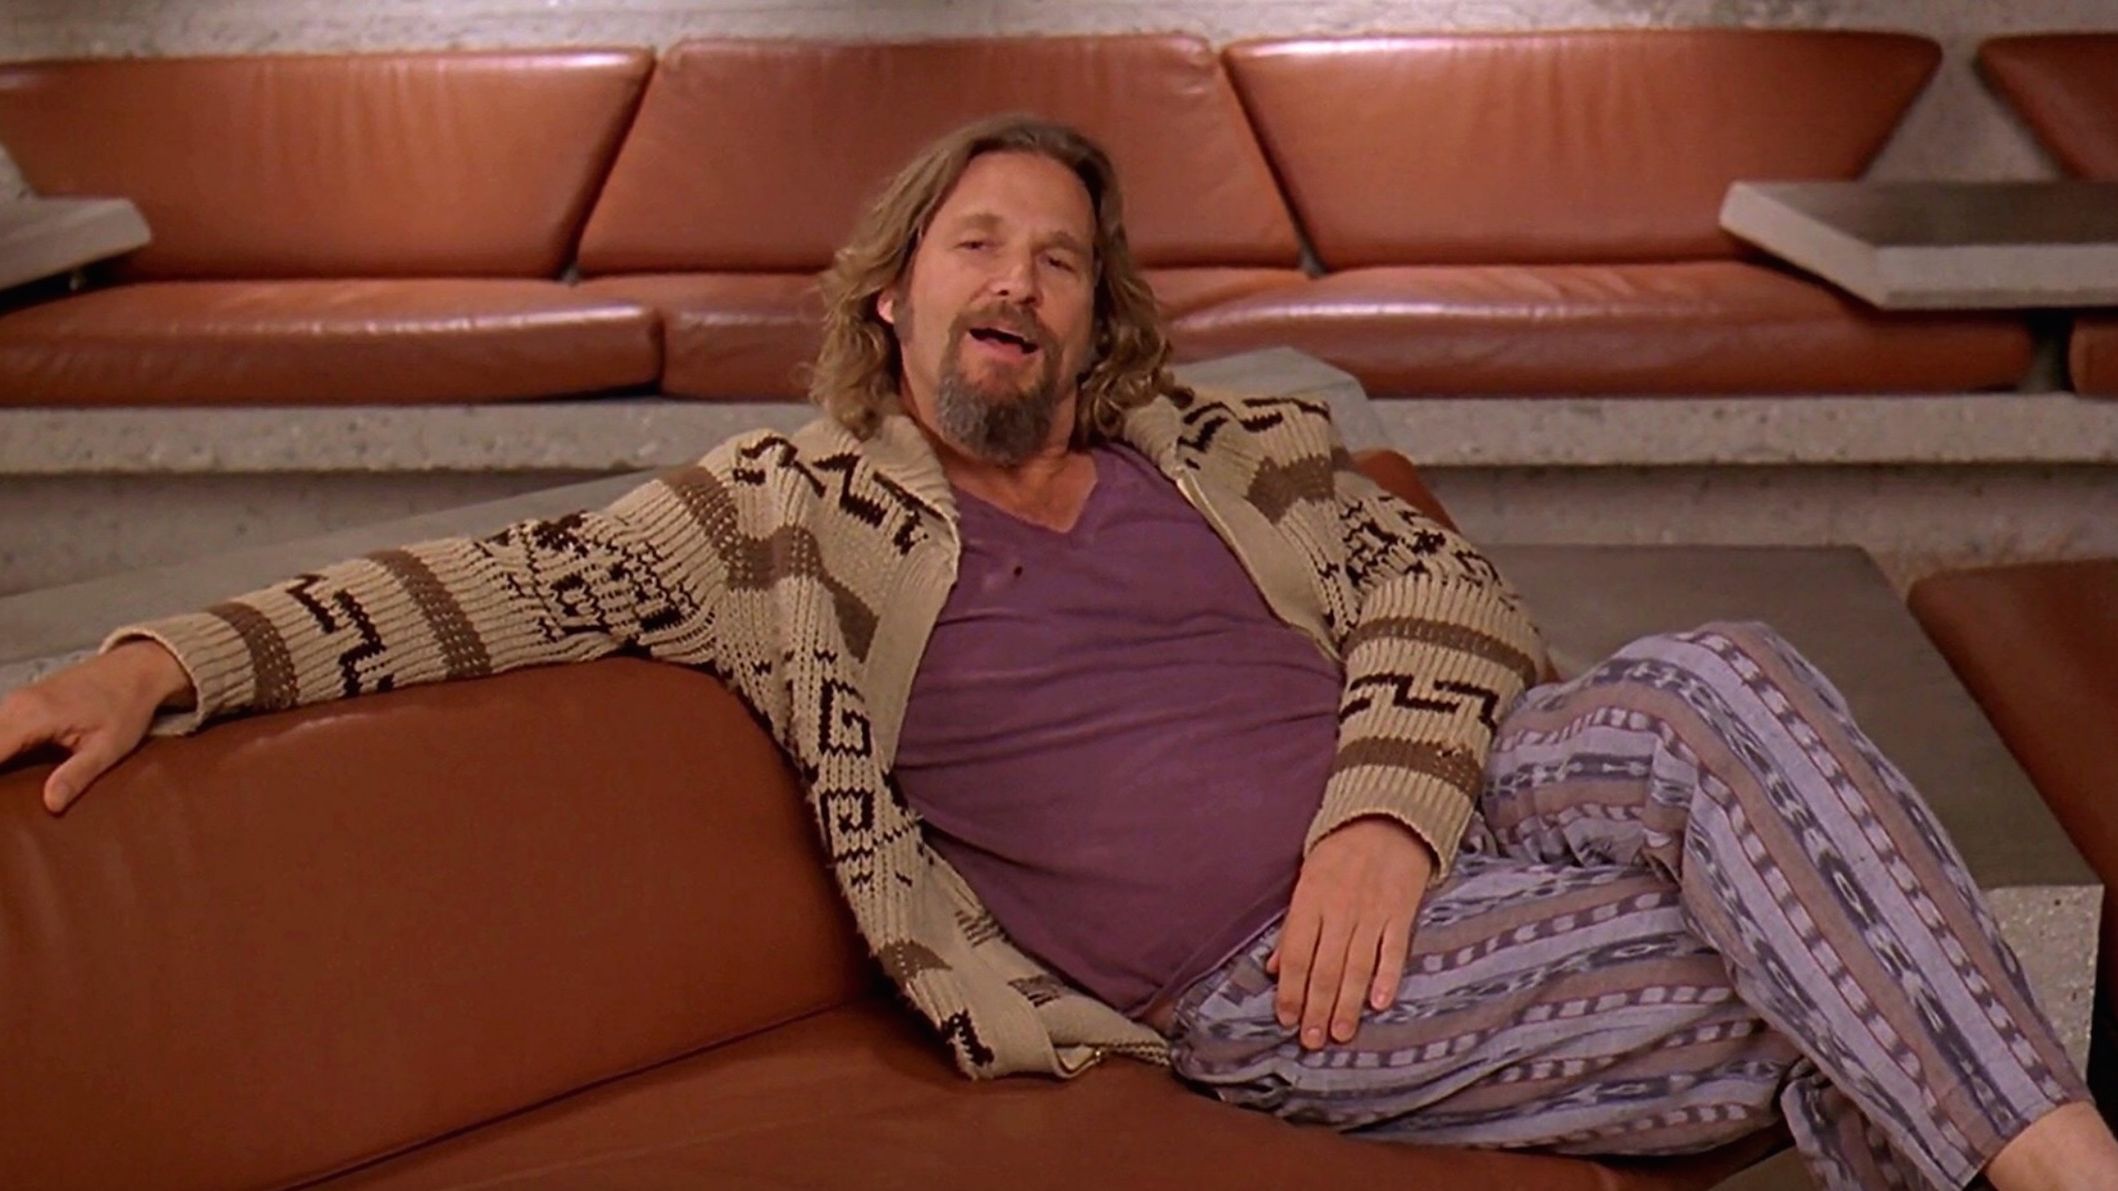 23 Huge Facts About The Big Lebowski | Mental Floss